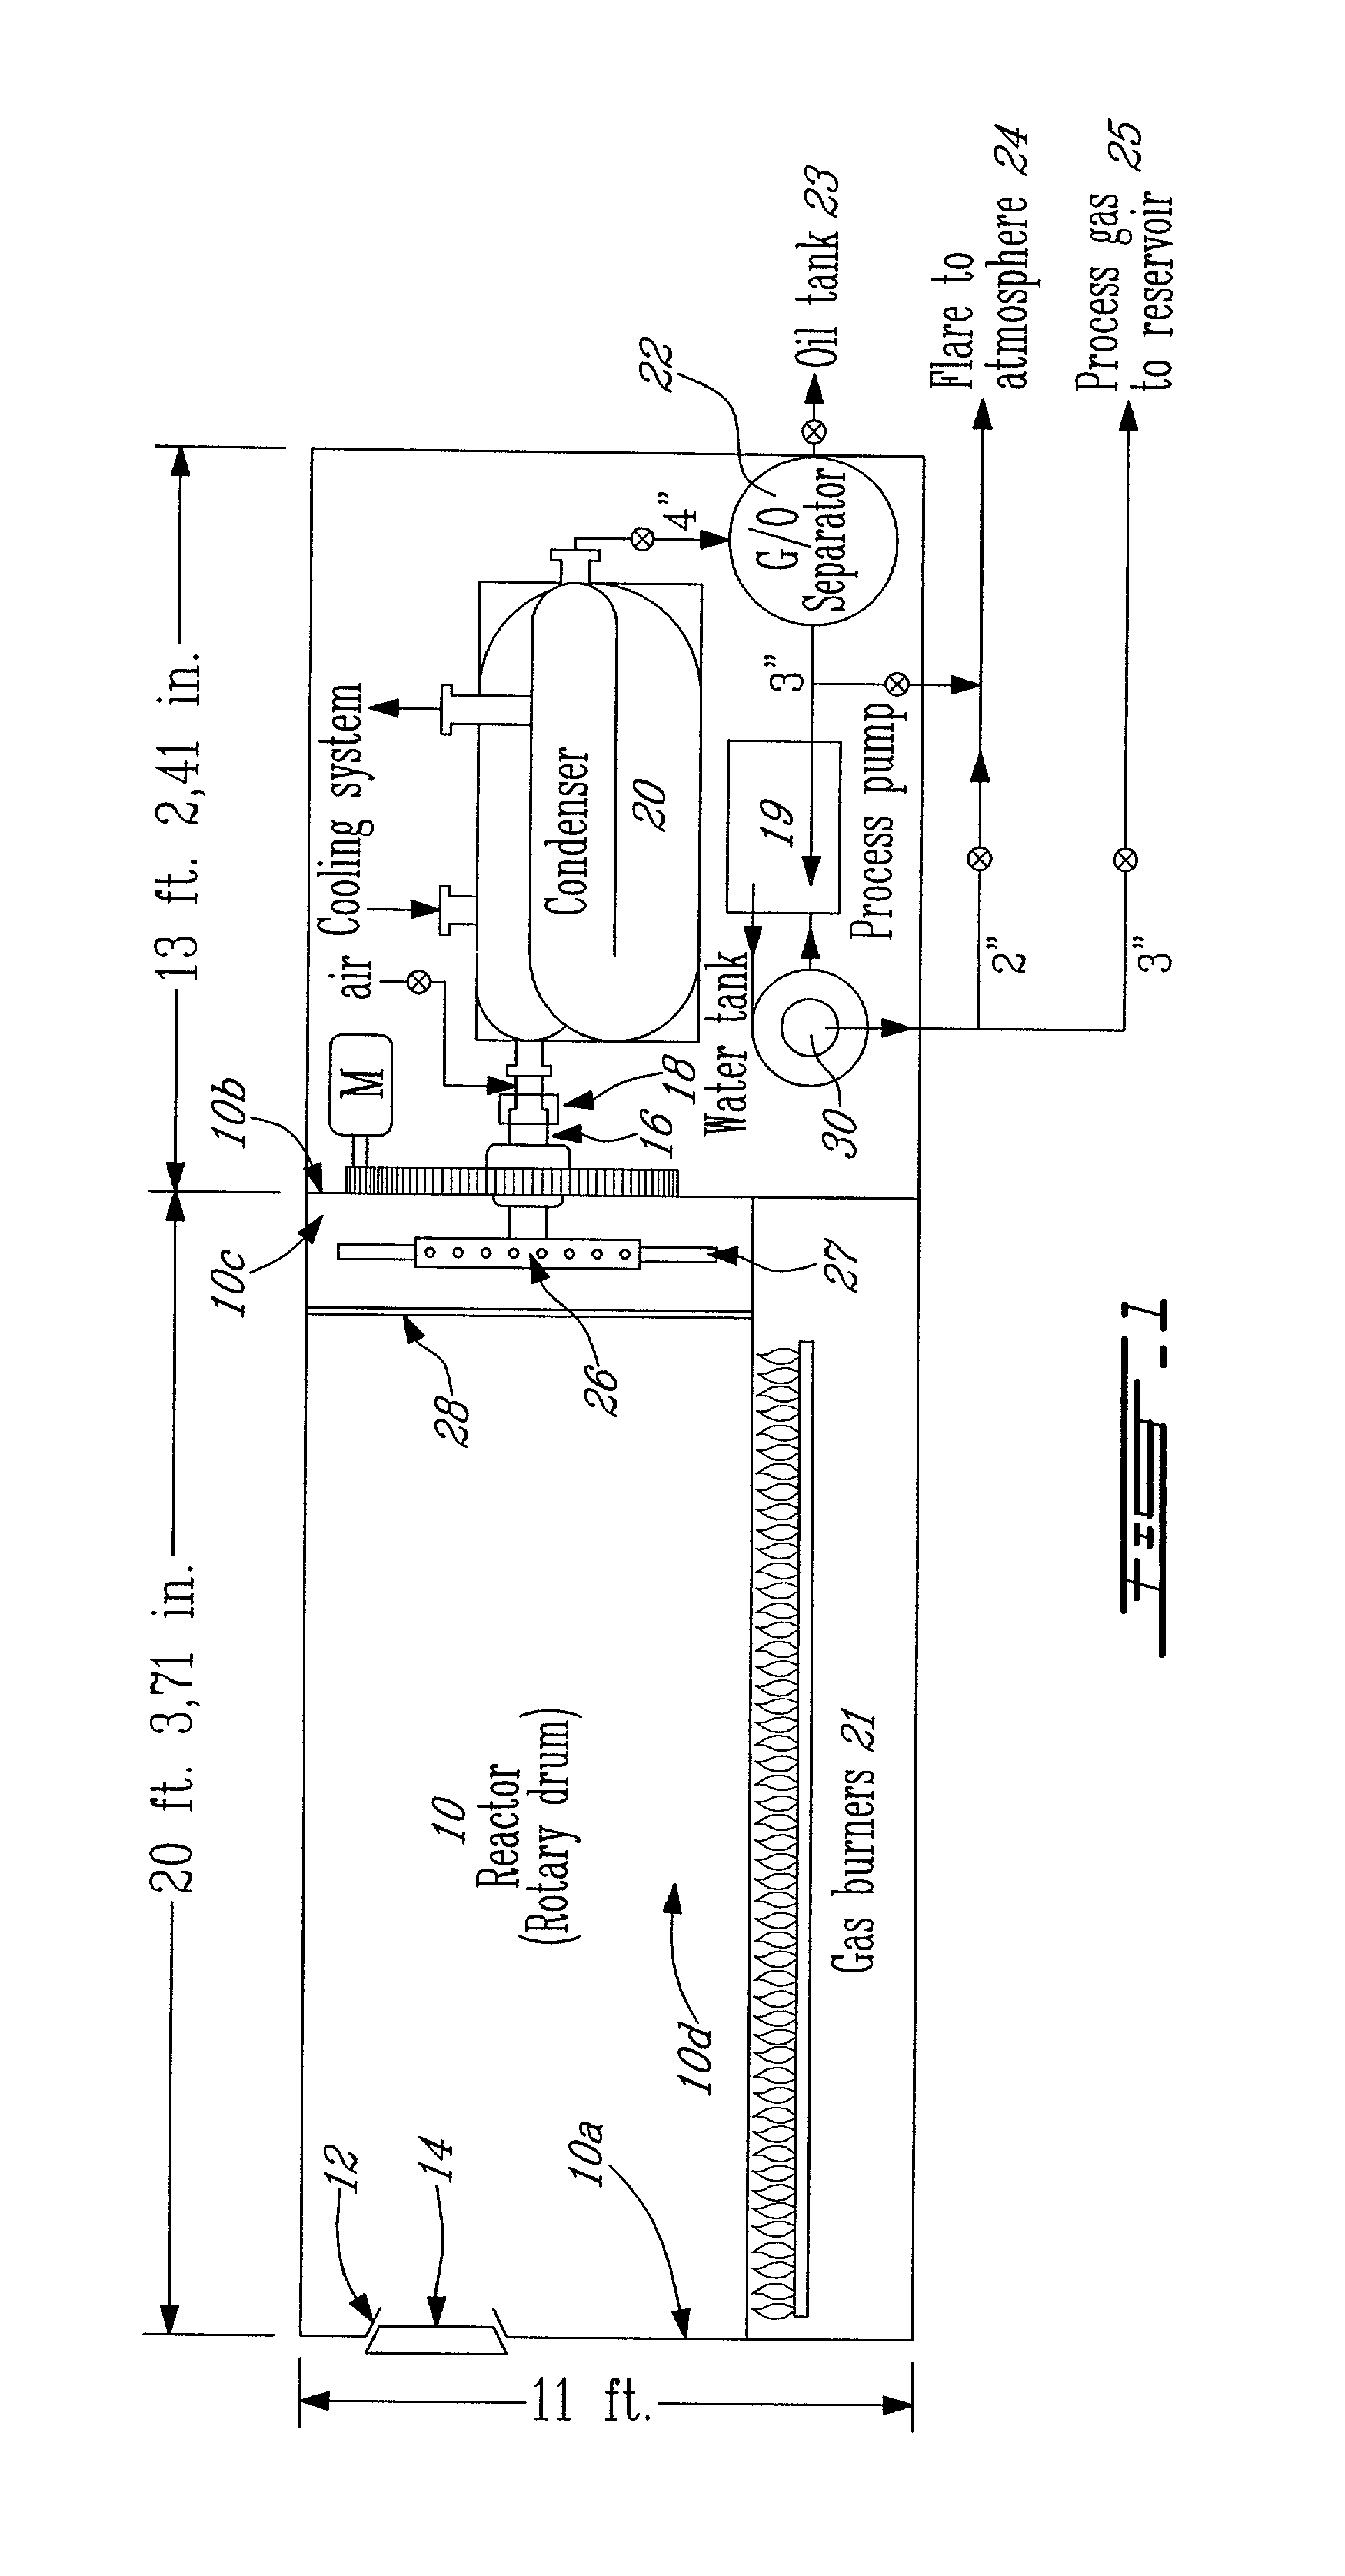 Anoxic reaction apparatus and process for obtaining an anoxic reaction therein